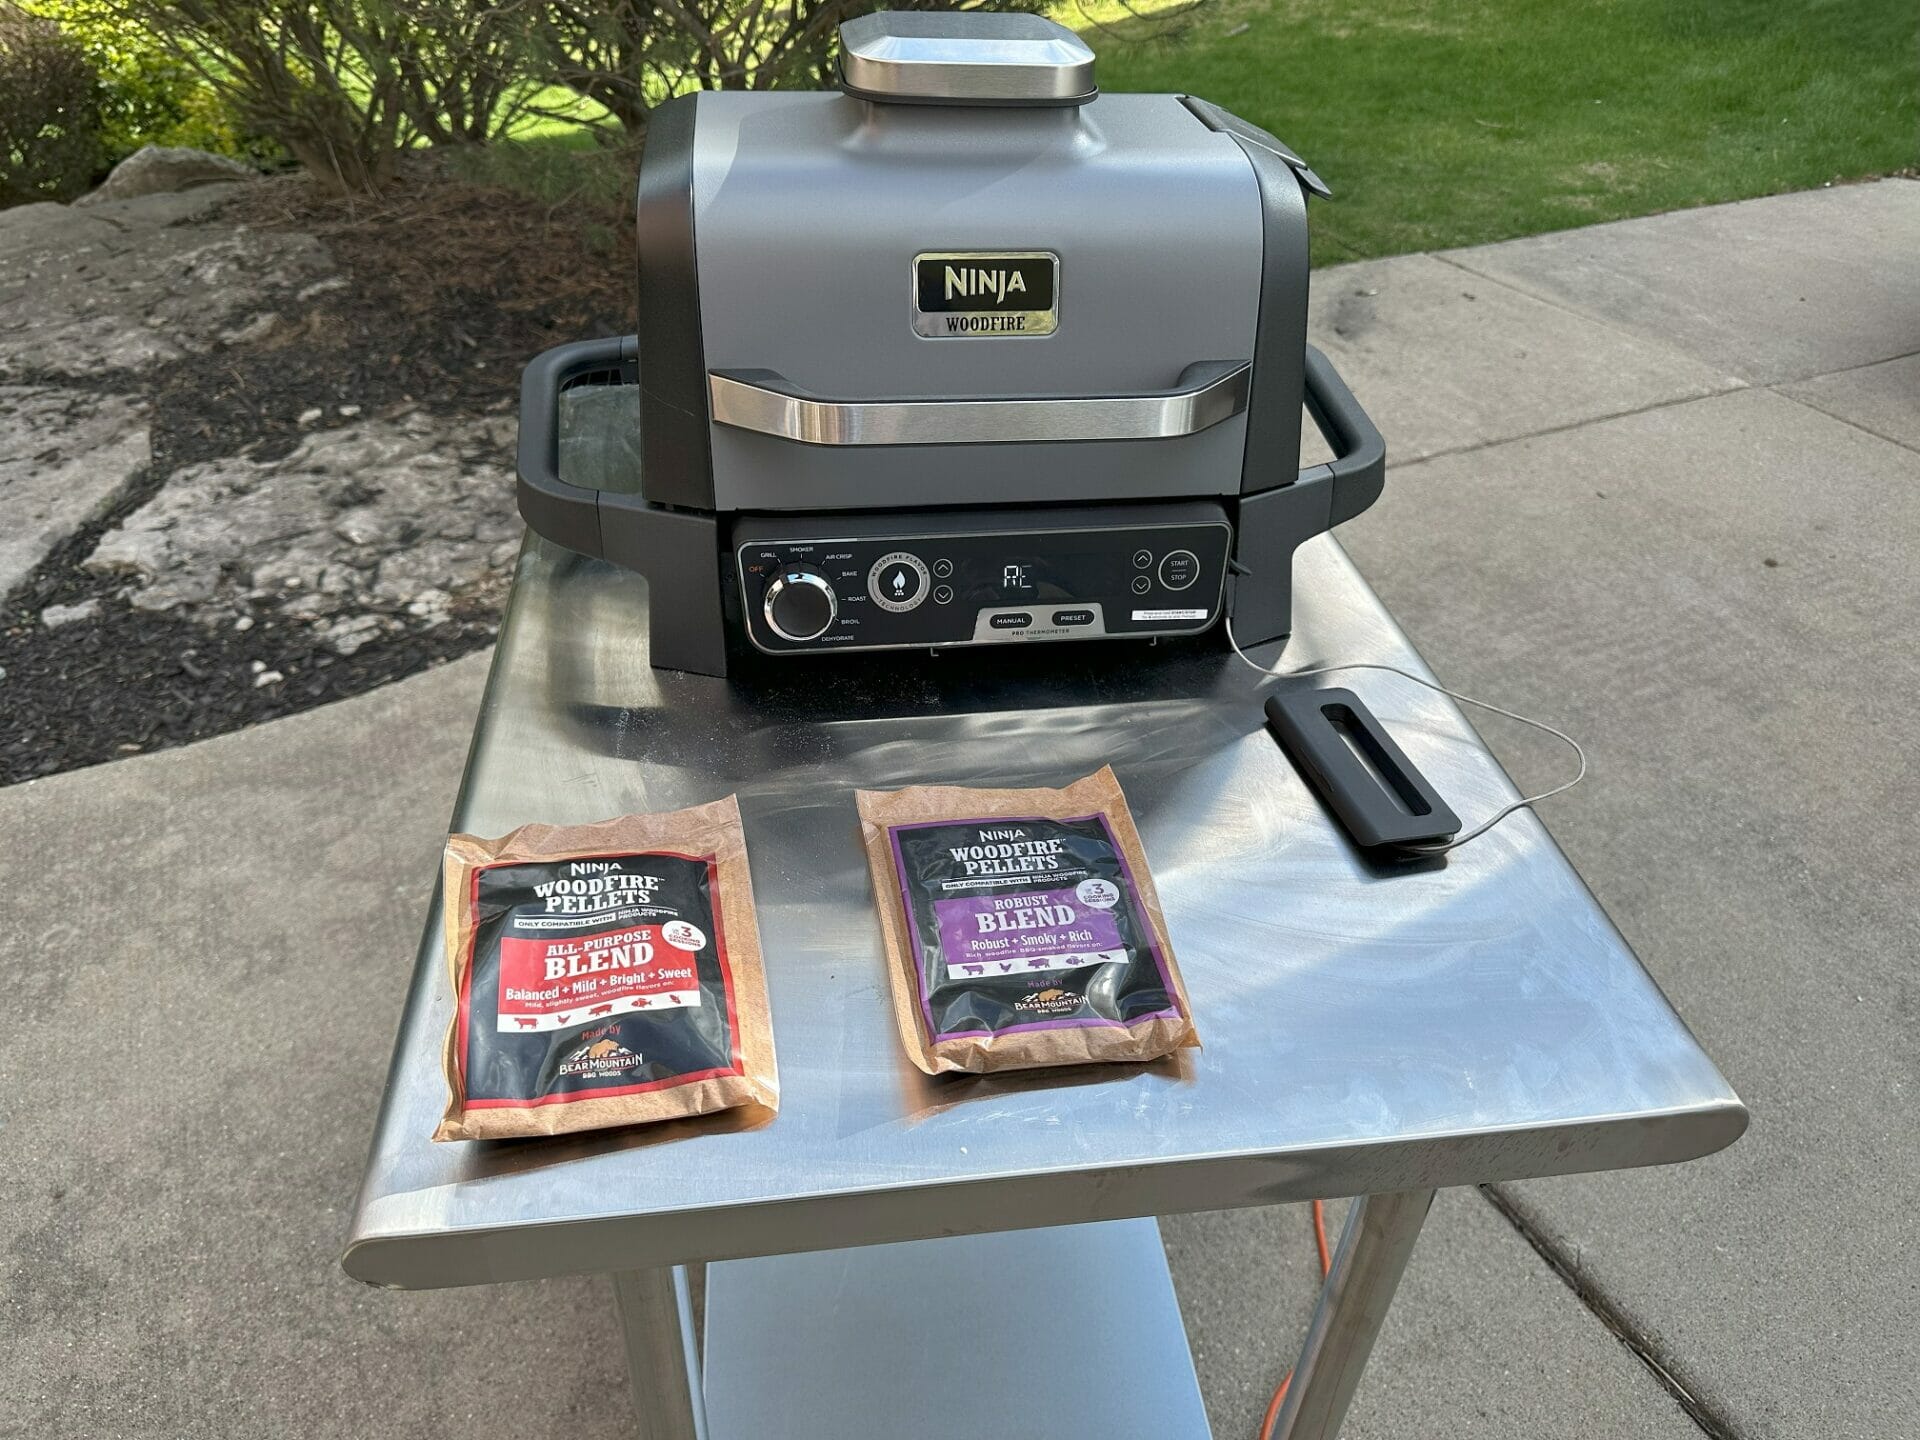 Ninja Woodfire Grill Review - Get it for Grilling and Air Frying